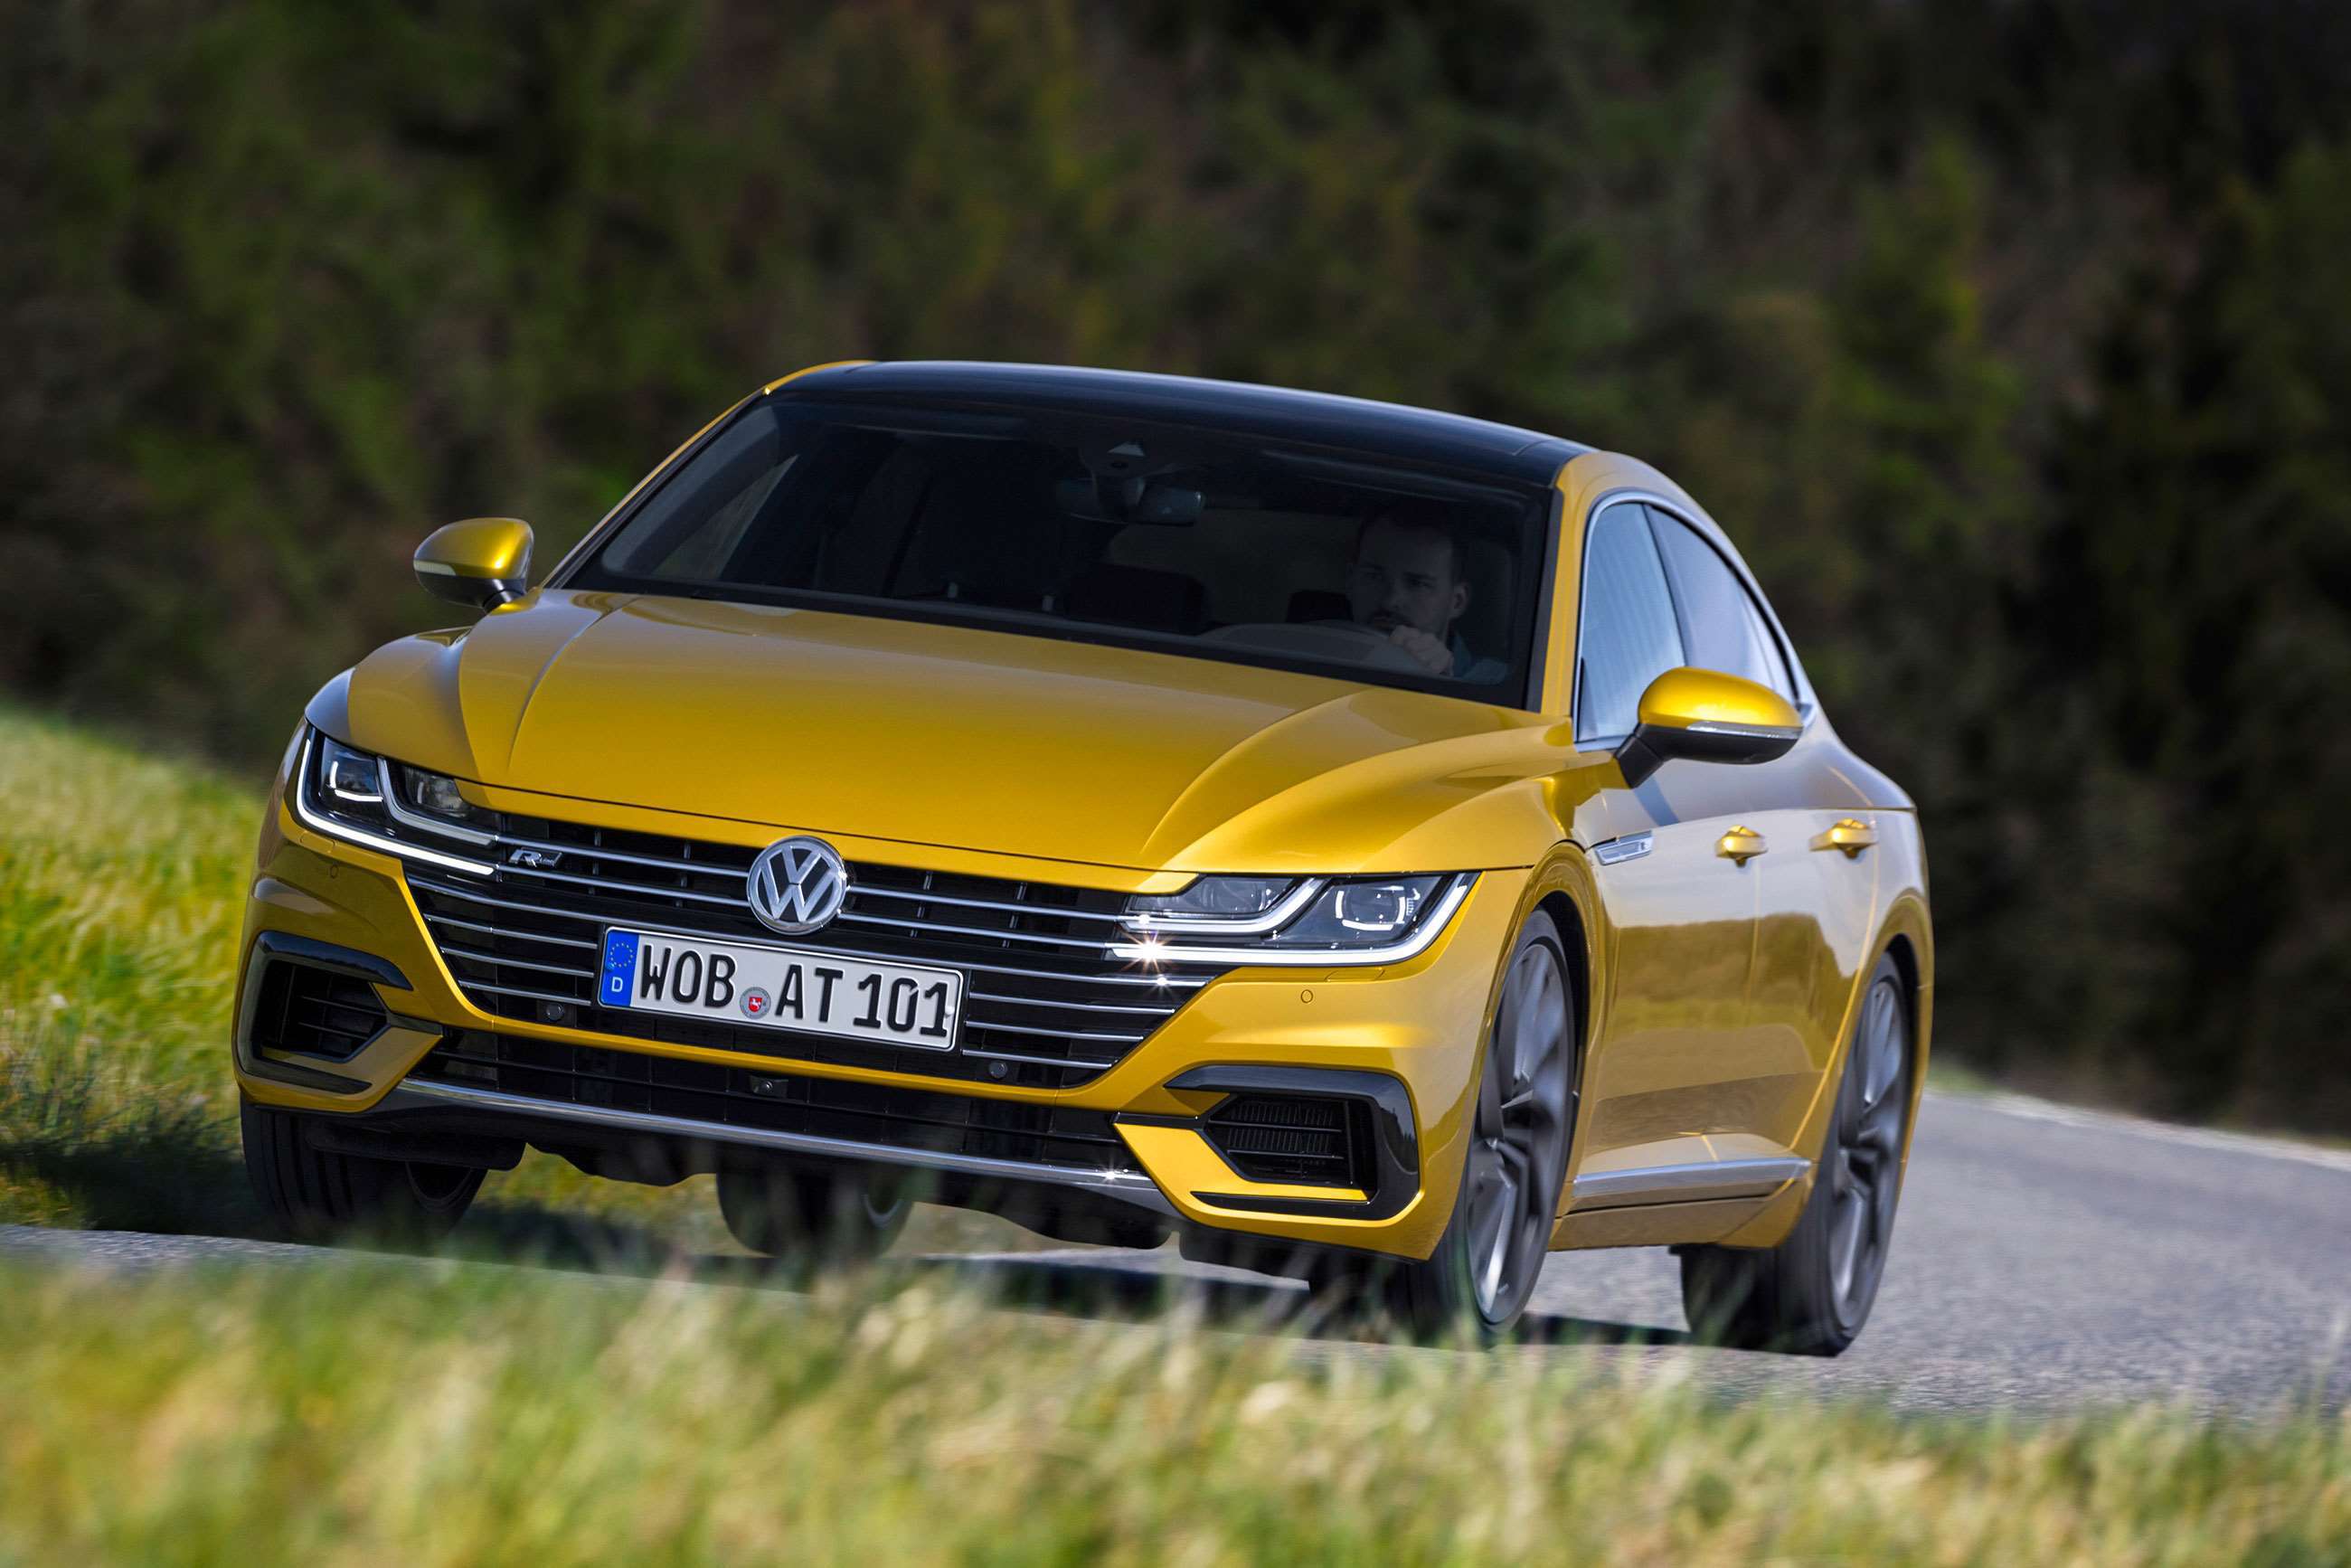 The old, slightly unloved Arteon.